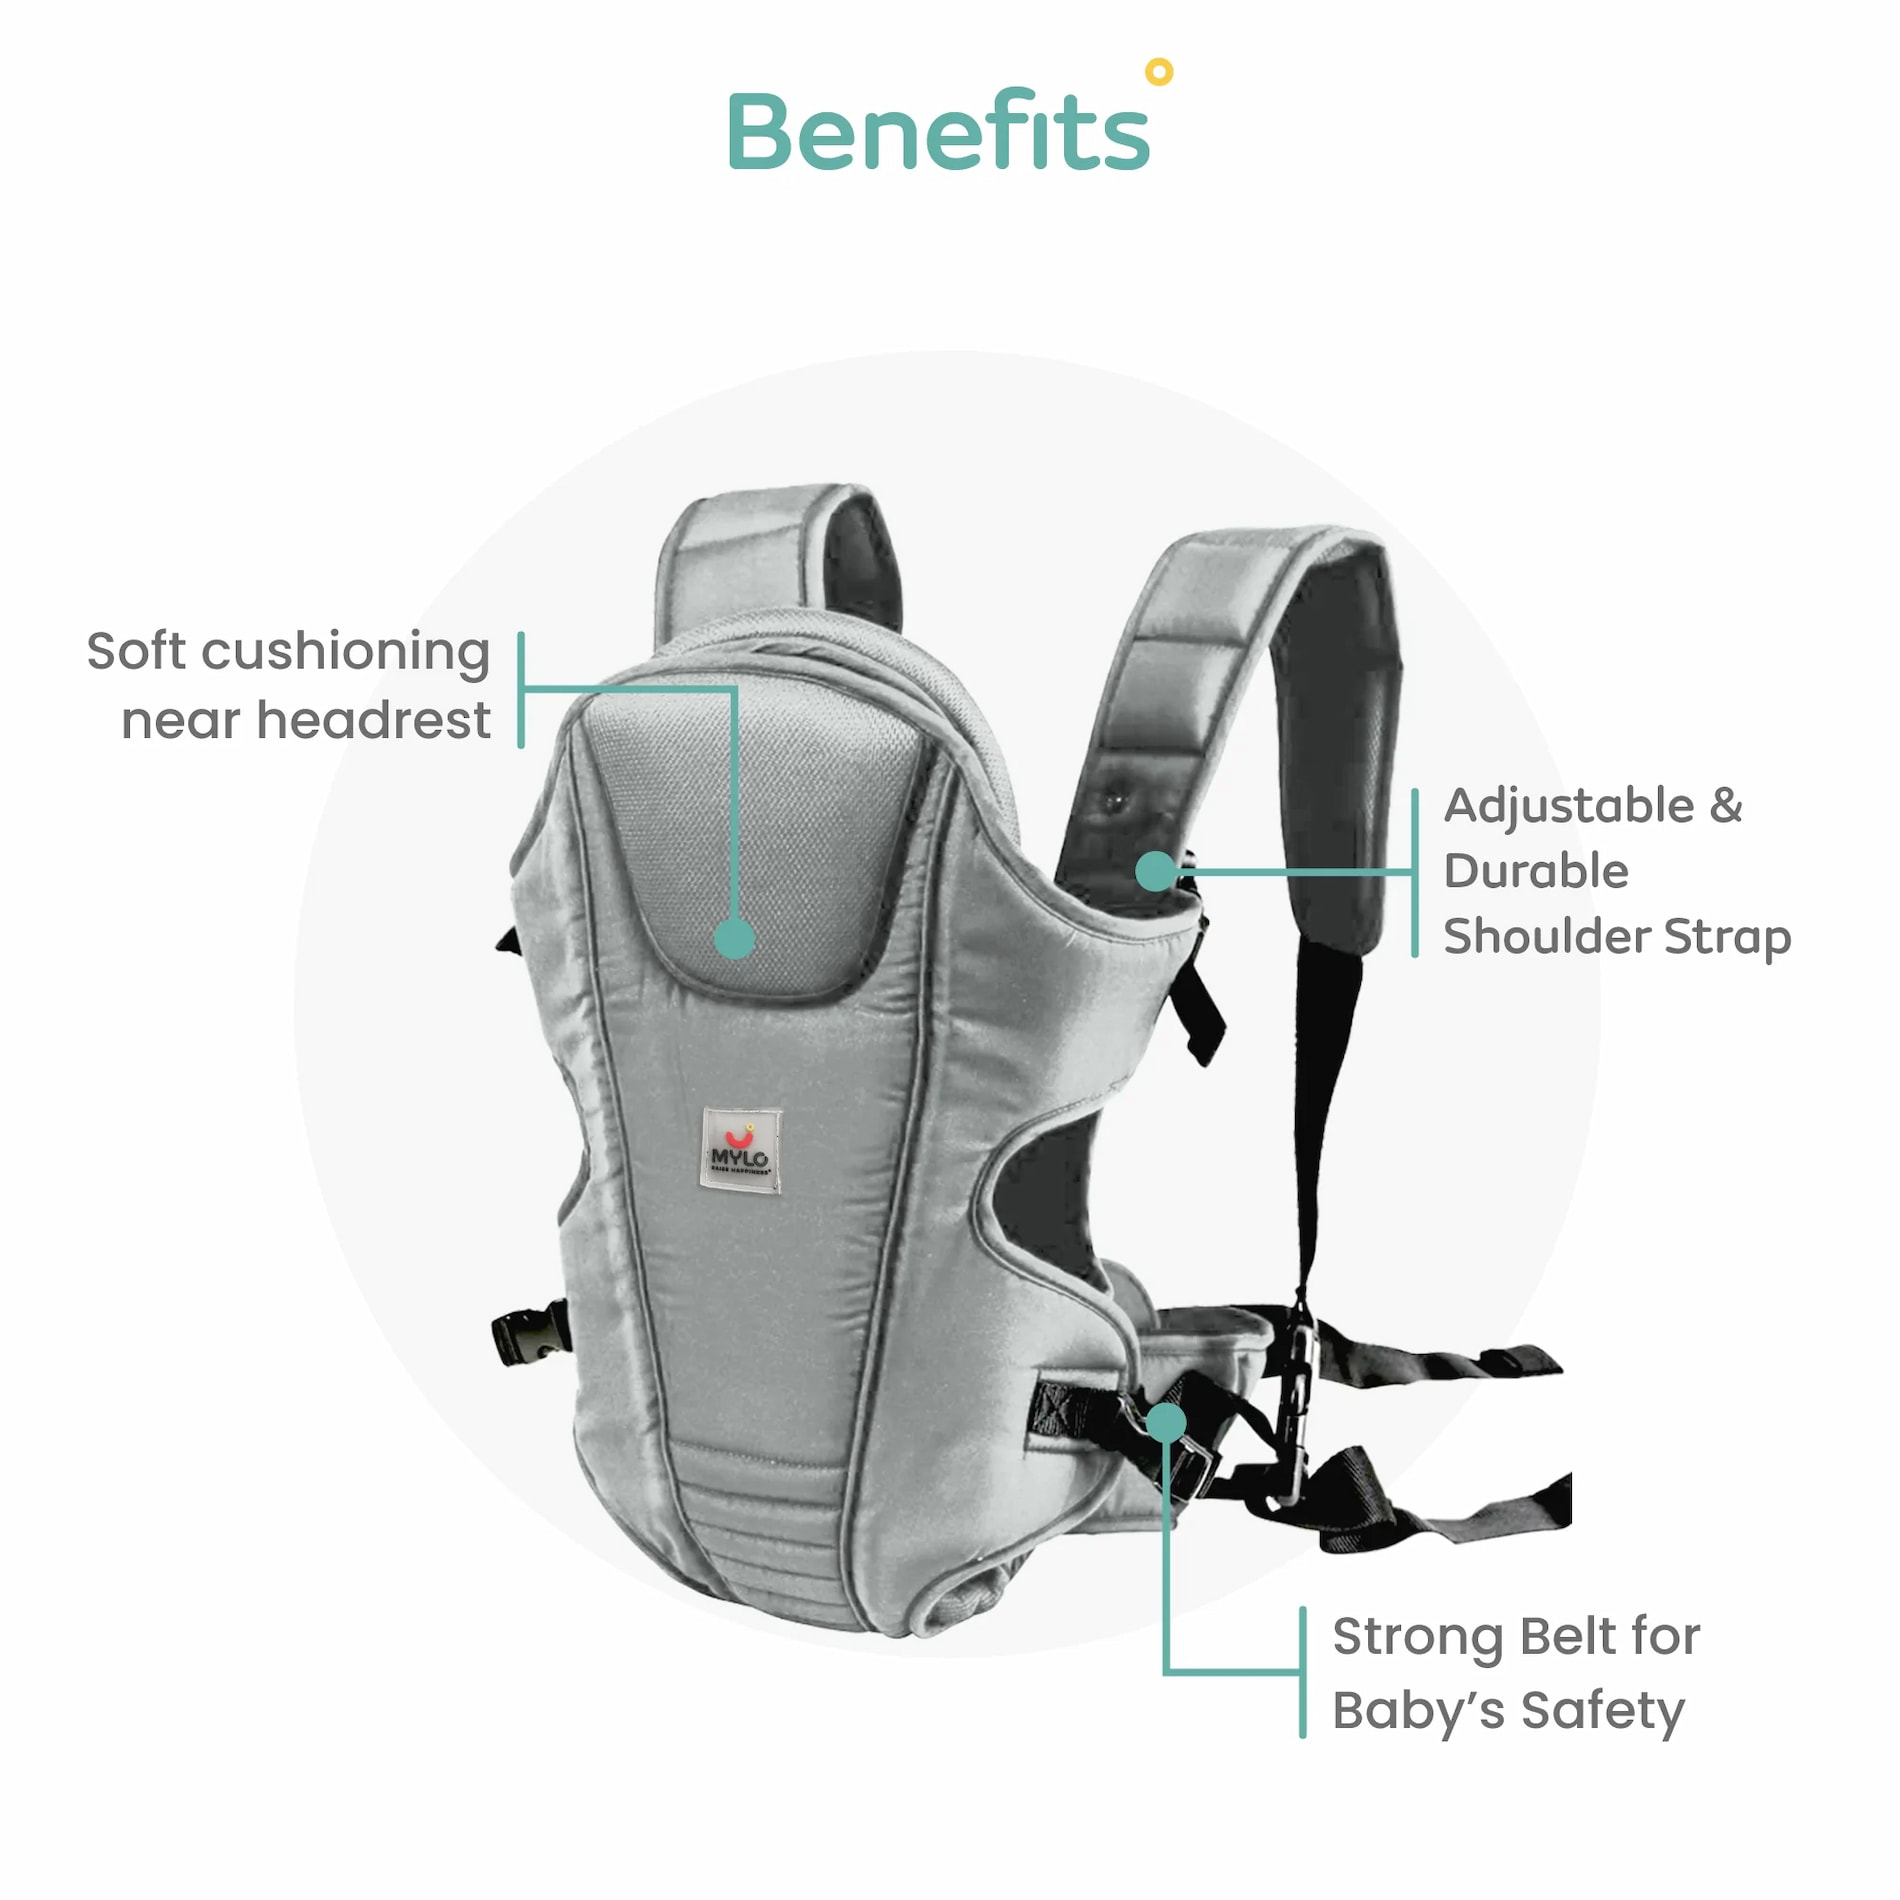 Baby Carrier Bag for 6 to 15 Months | 3 Carrying Positions | Adjustable & Durable Shoulder Straps | Soft Cushioning Near Headrest | Grey